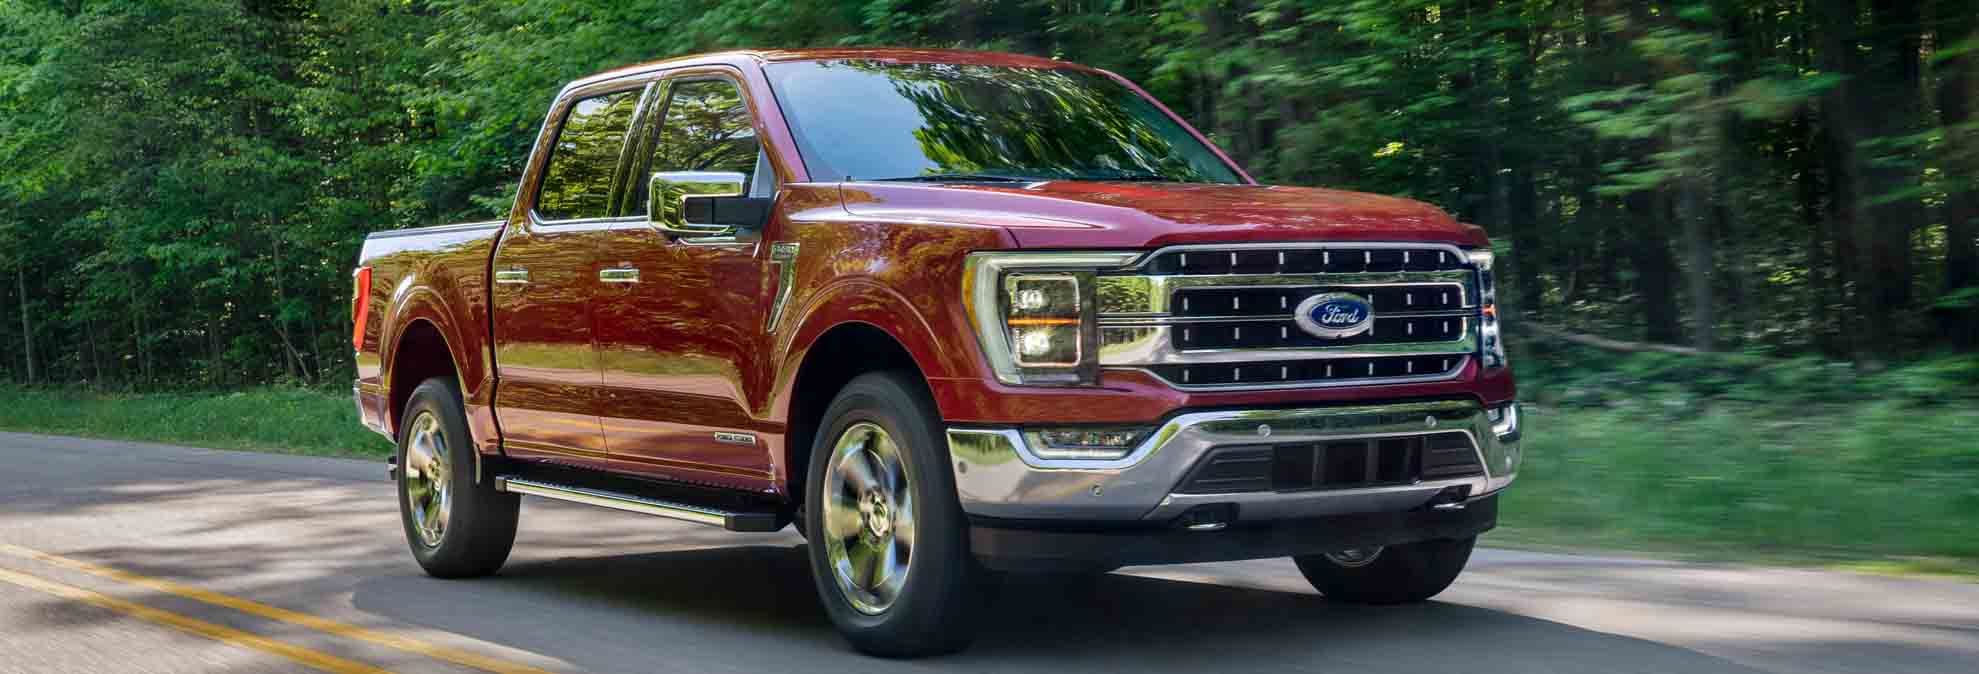 Pickup Truck Buying Guide